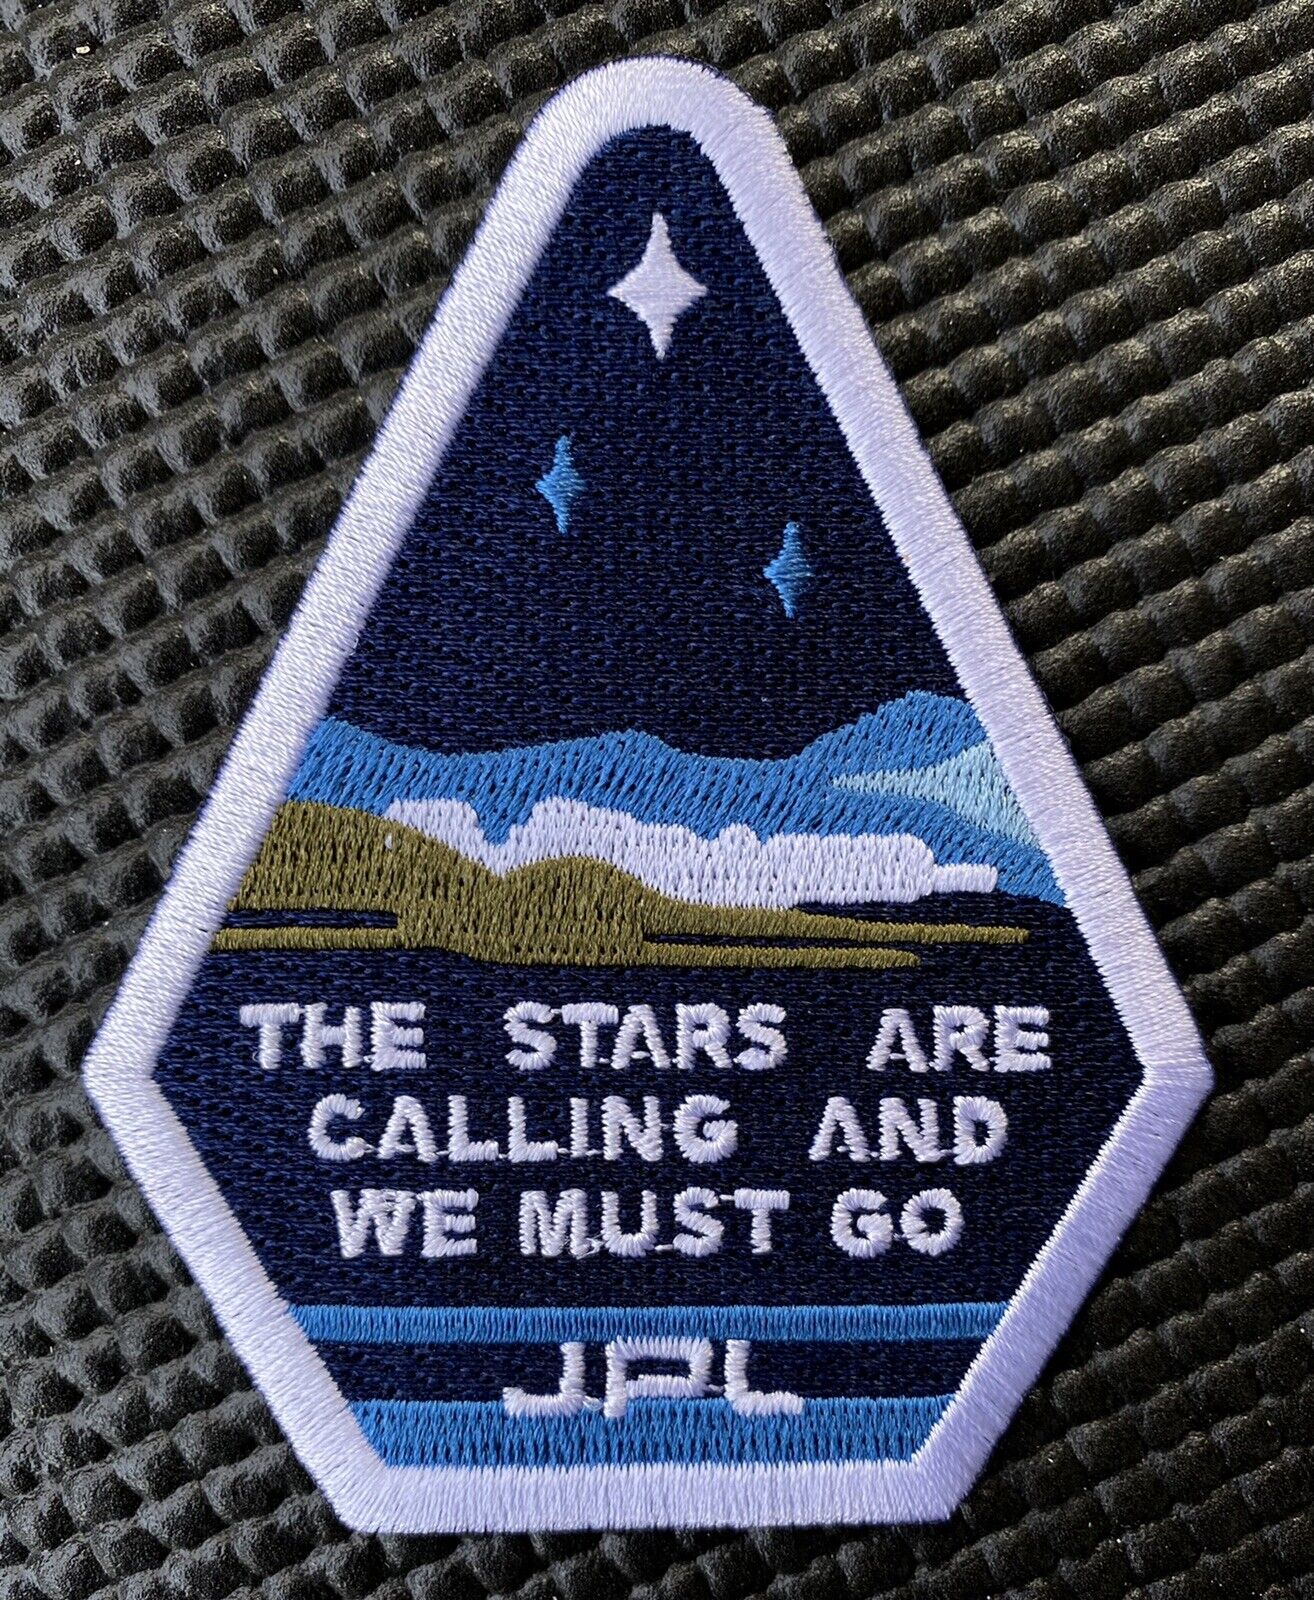 RARE - JPL NASA Space Patch “The Stars Are Calling And We Must Go” - 4”